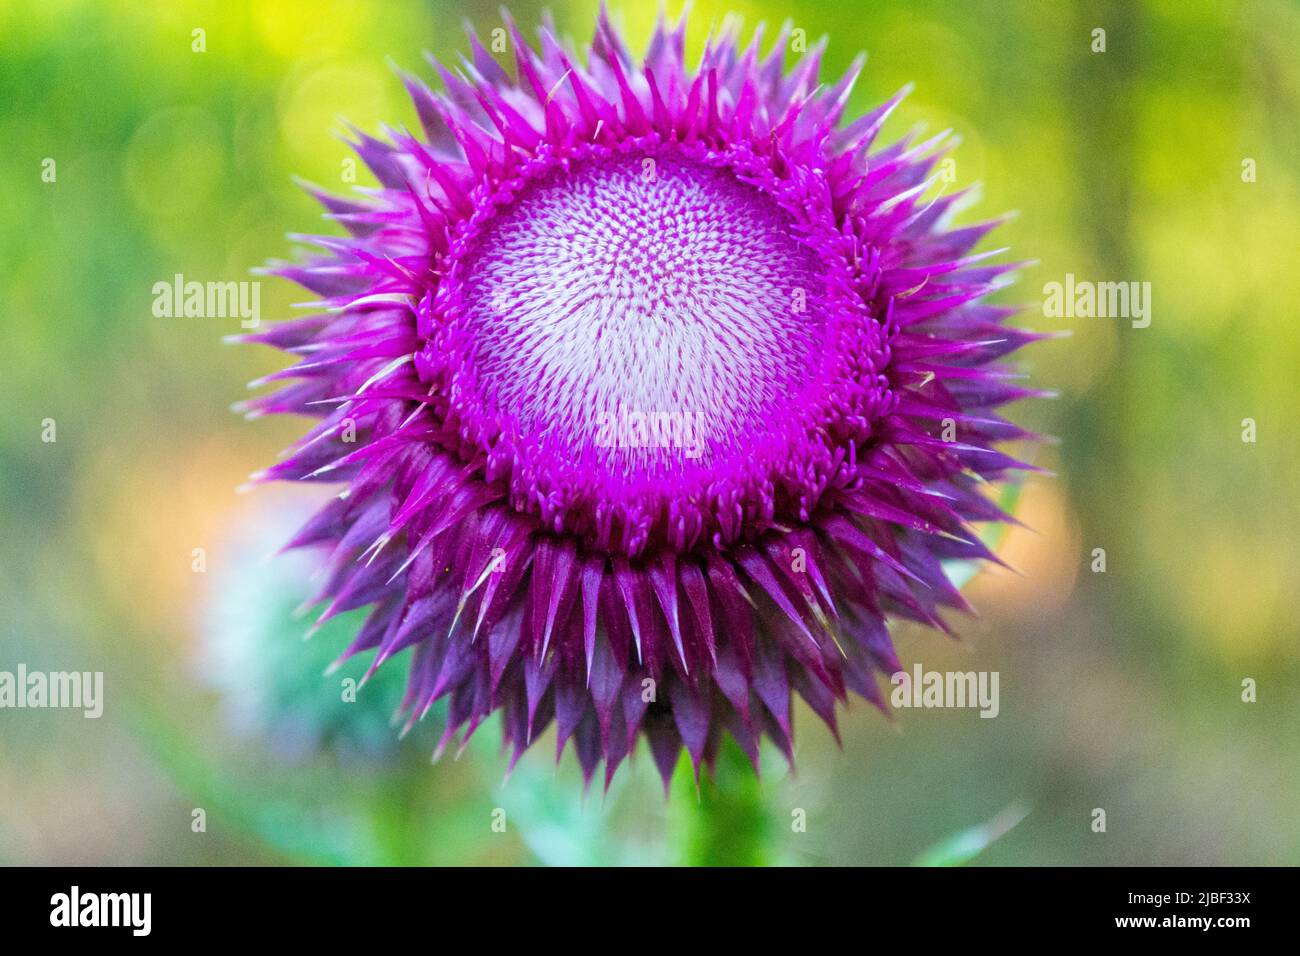 Pink flower of thistle herbaceous plant Stock Photo